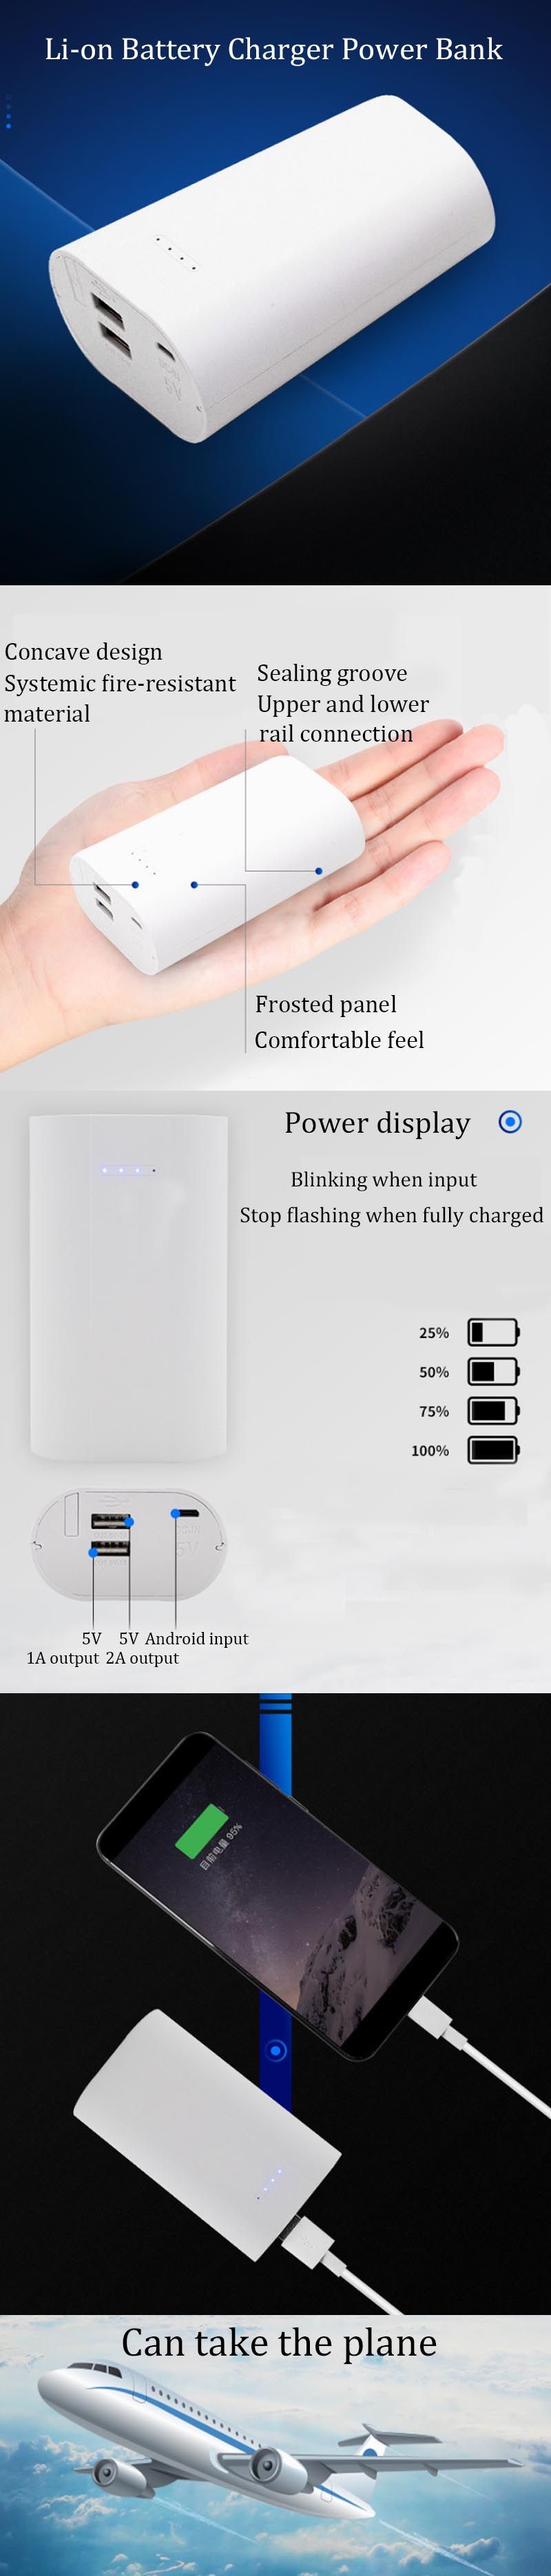 TOMO-26650-Li-on-Battery-Charger-Portable-Power-Bank-Travel-Camping-Hiking-USB-Battery-Charger-1405482